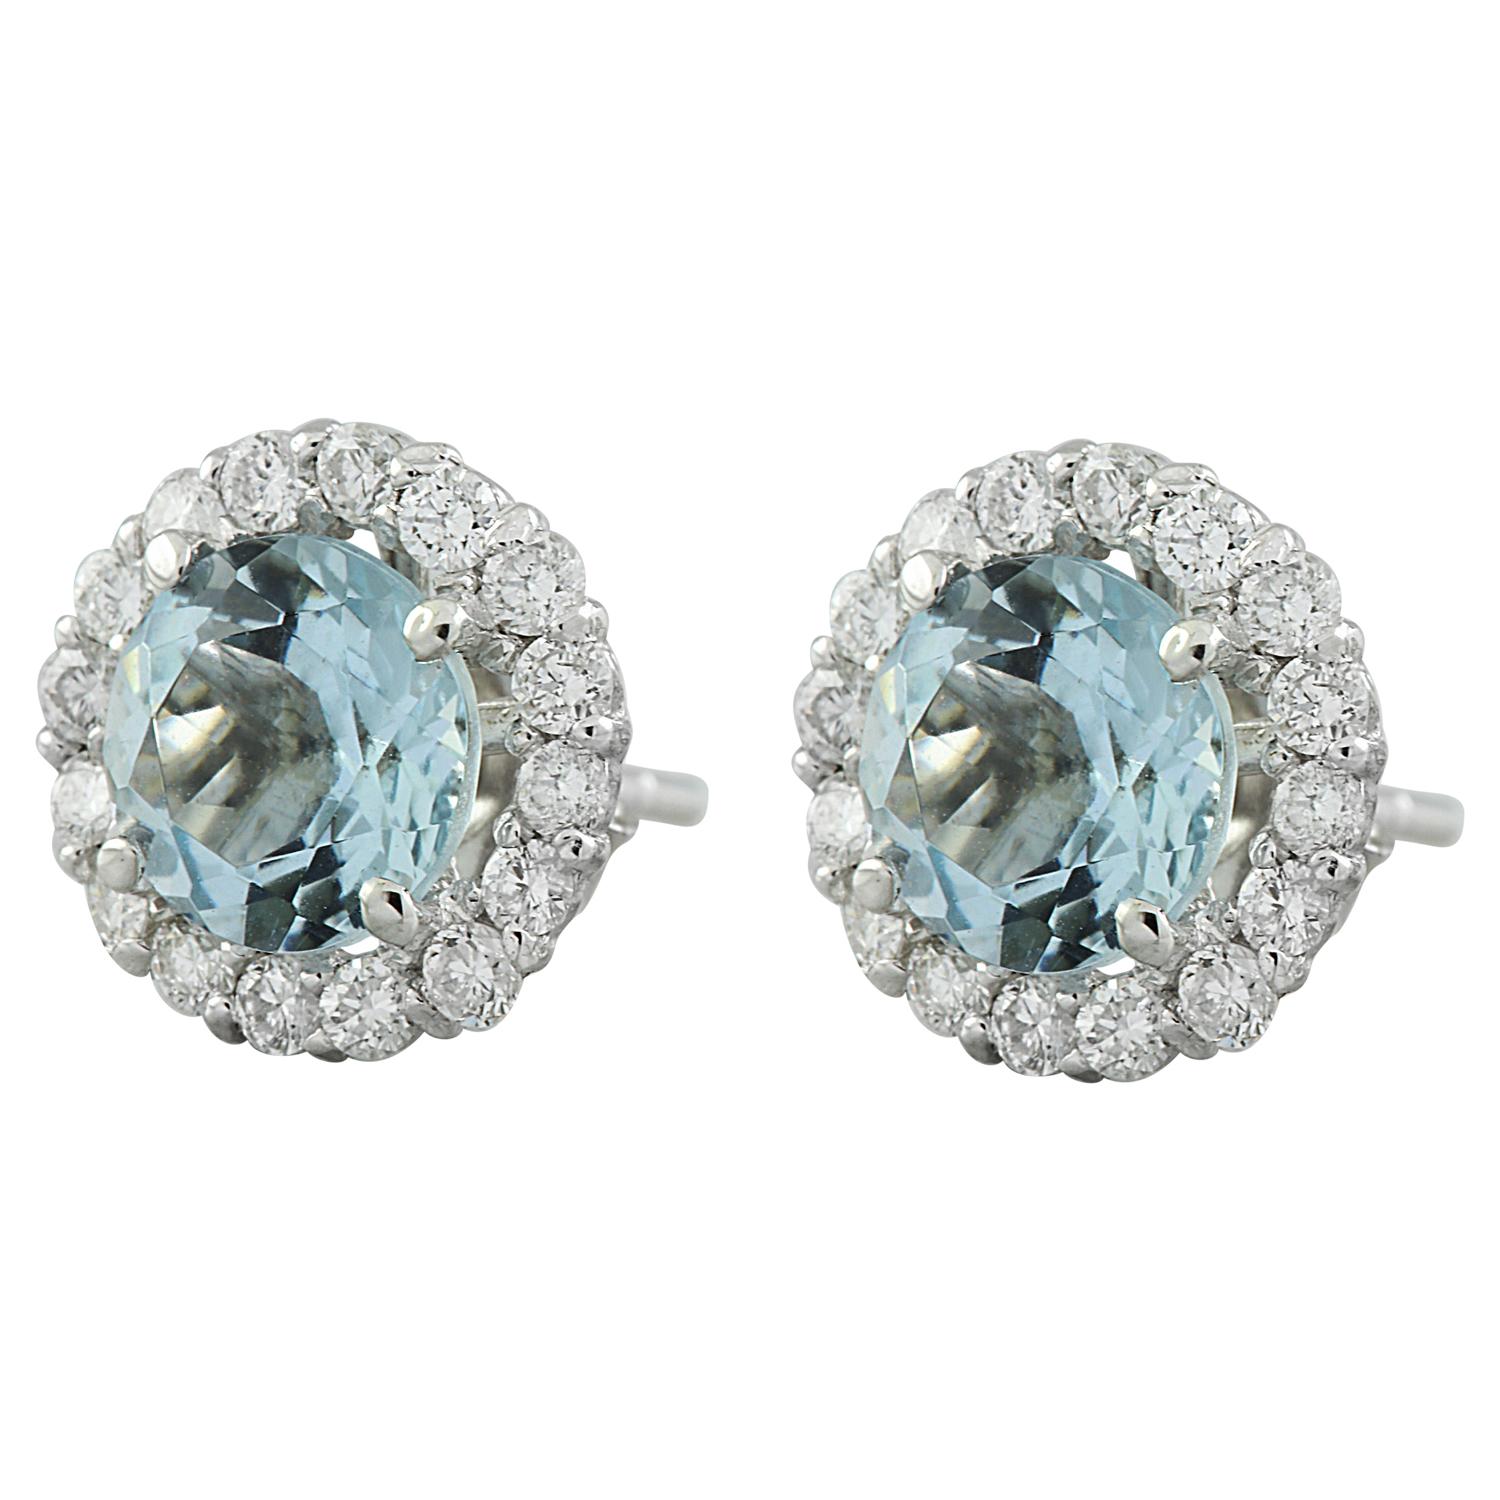 Introducing our stunning 14 Karat Solid White Gold Diamond Earrings featuring a captivating 3.65 Carat Natural Aquamarine centerpiece, stamped for authenticity. Weighing 2.3 grams in total, these earrings exude elegance and sophistication. The